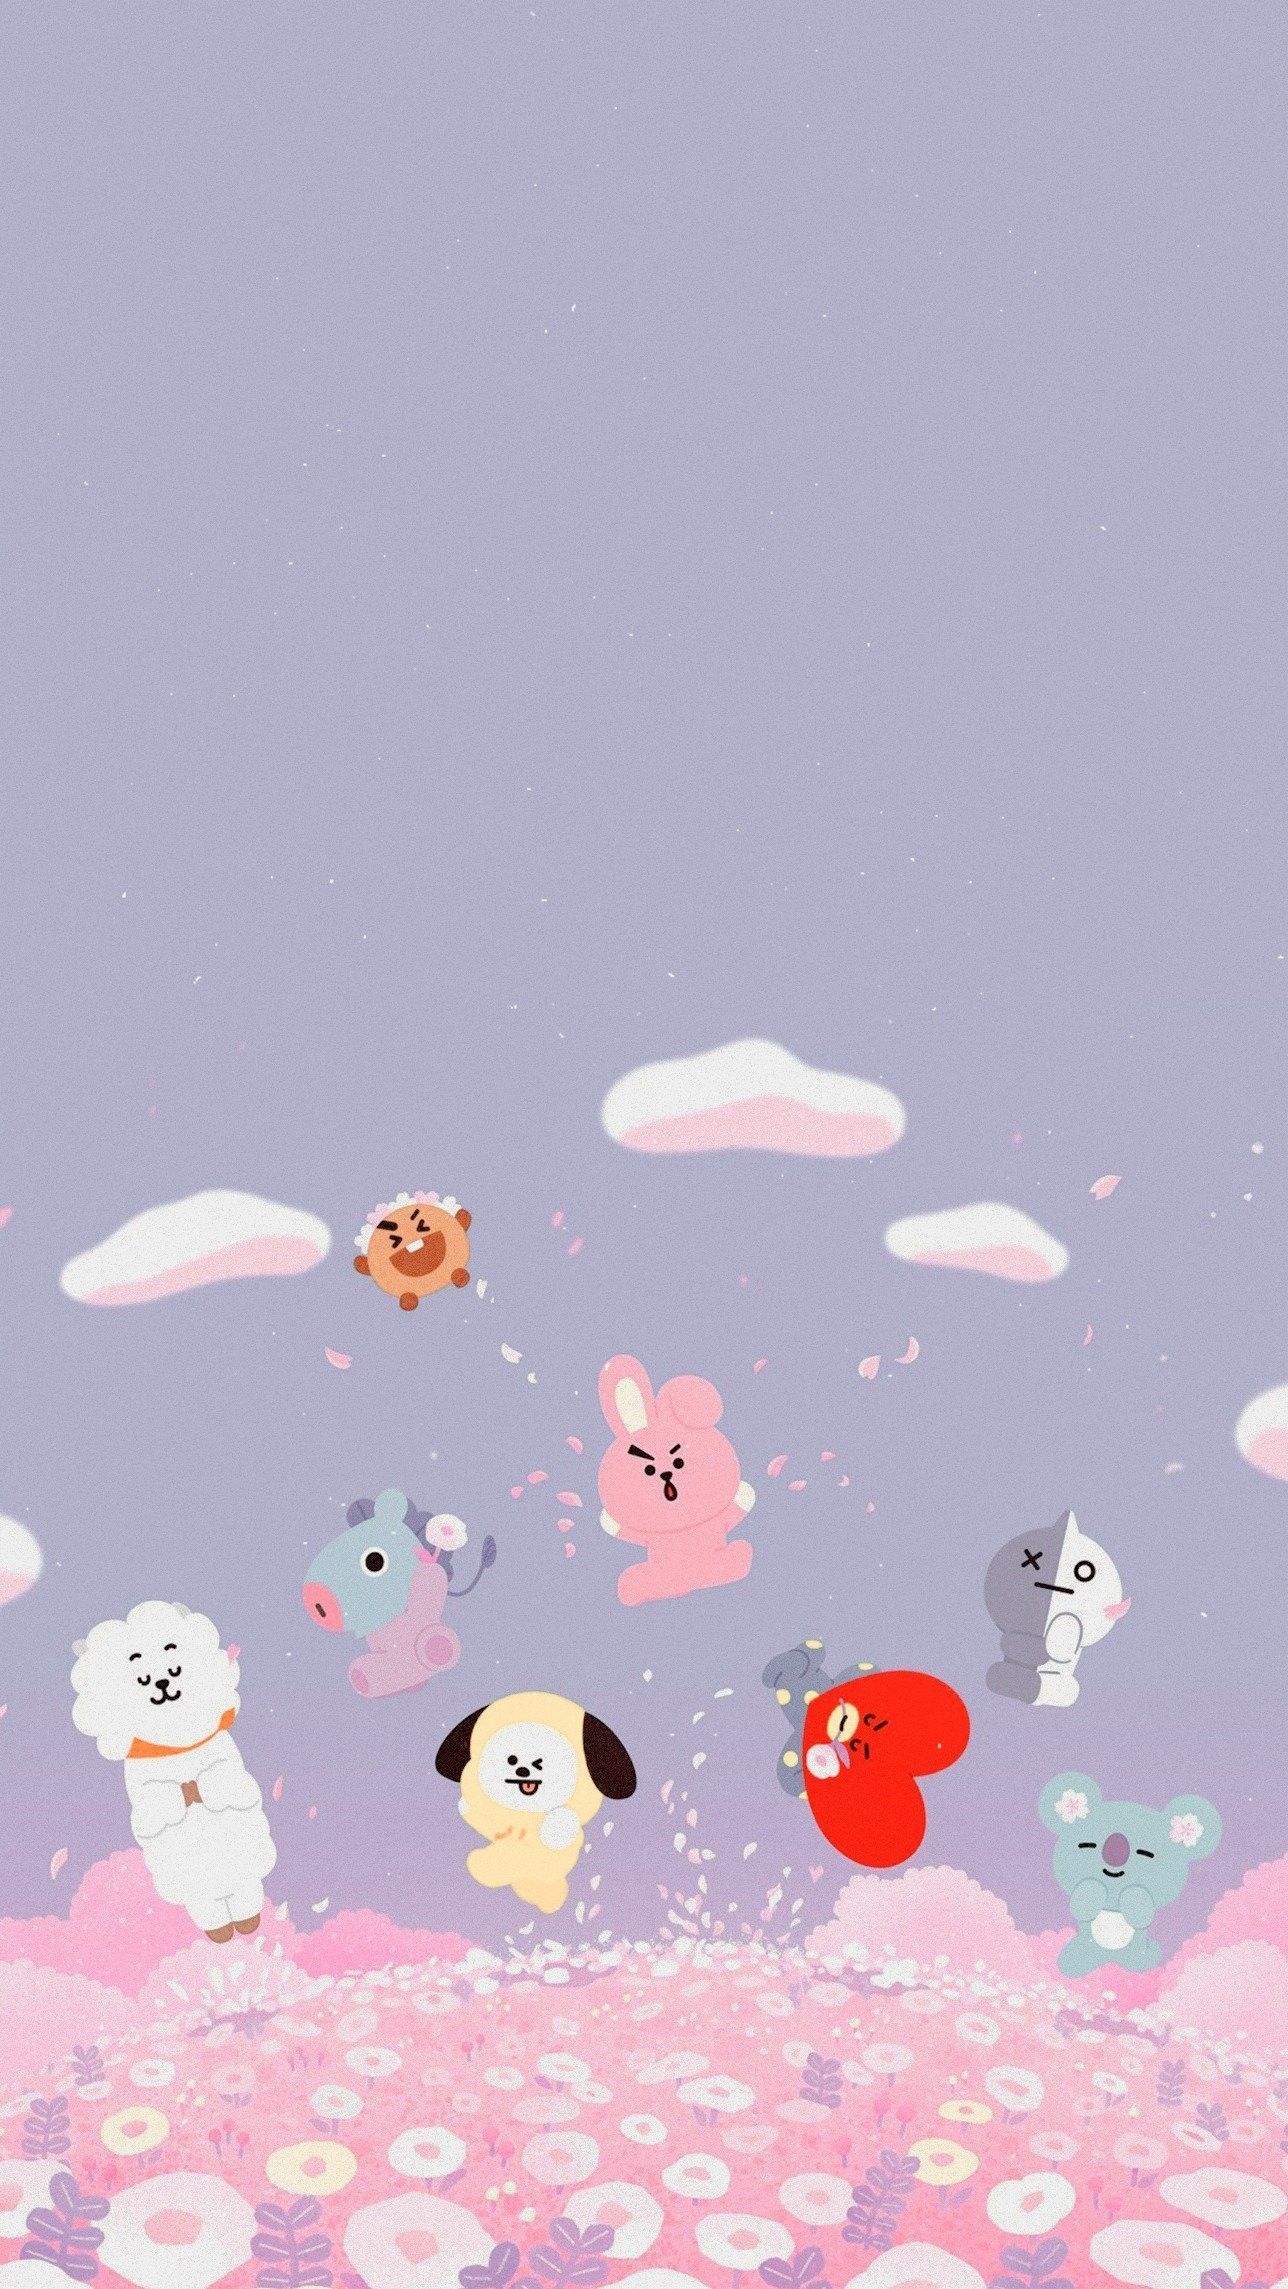 BT21 iPhone Wallpaper with high-resolution 1080x1920 pixel. You can use this wallpaper for your iPhone 5, 6, 7, 8, X, XS, XR backgrounds, Mobile Screensaver, or iPad Lock Screen - BT21